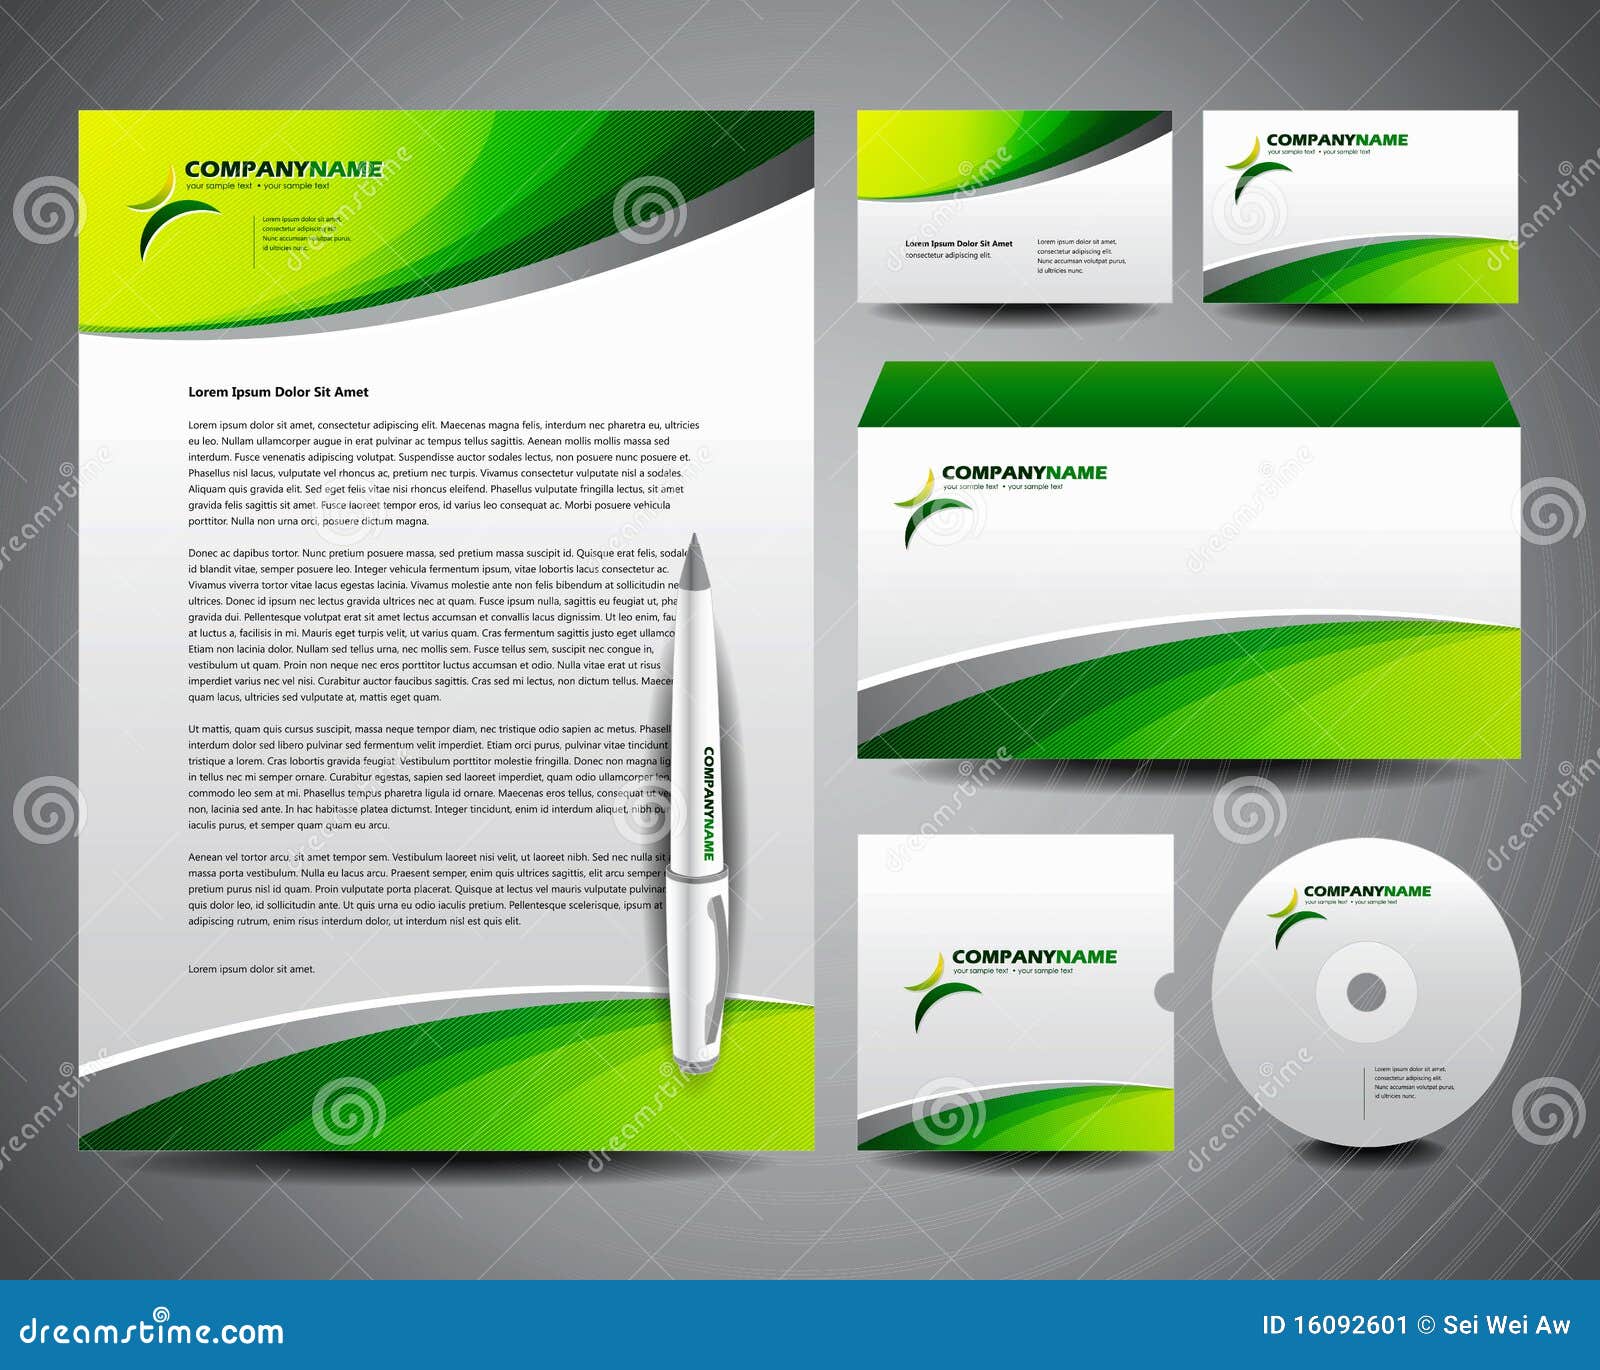 Well prepared and designed business stationery templates with strong 